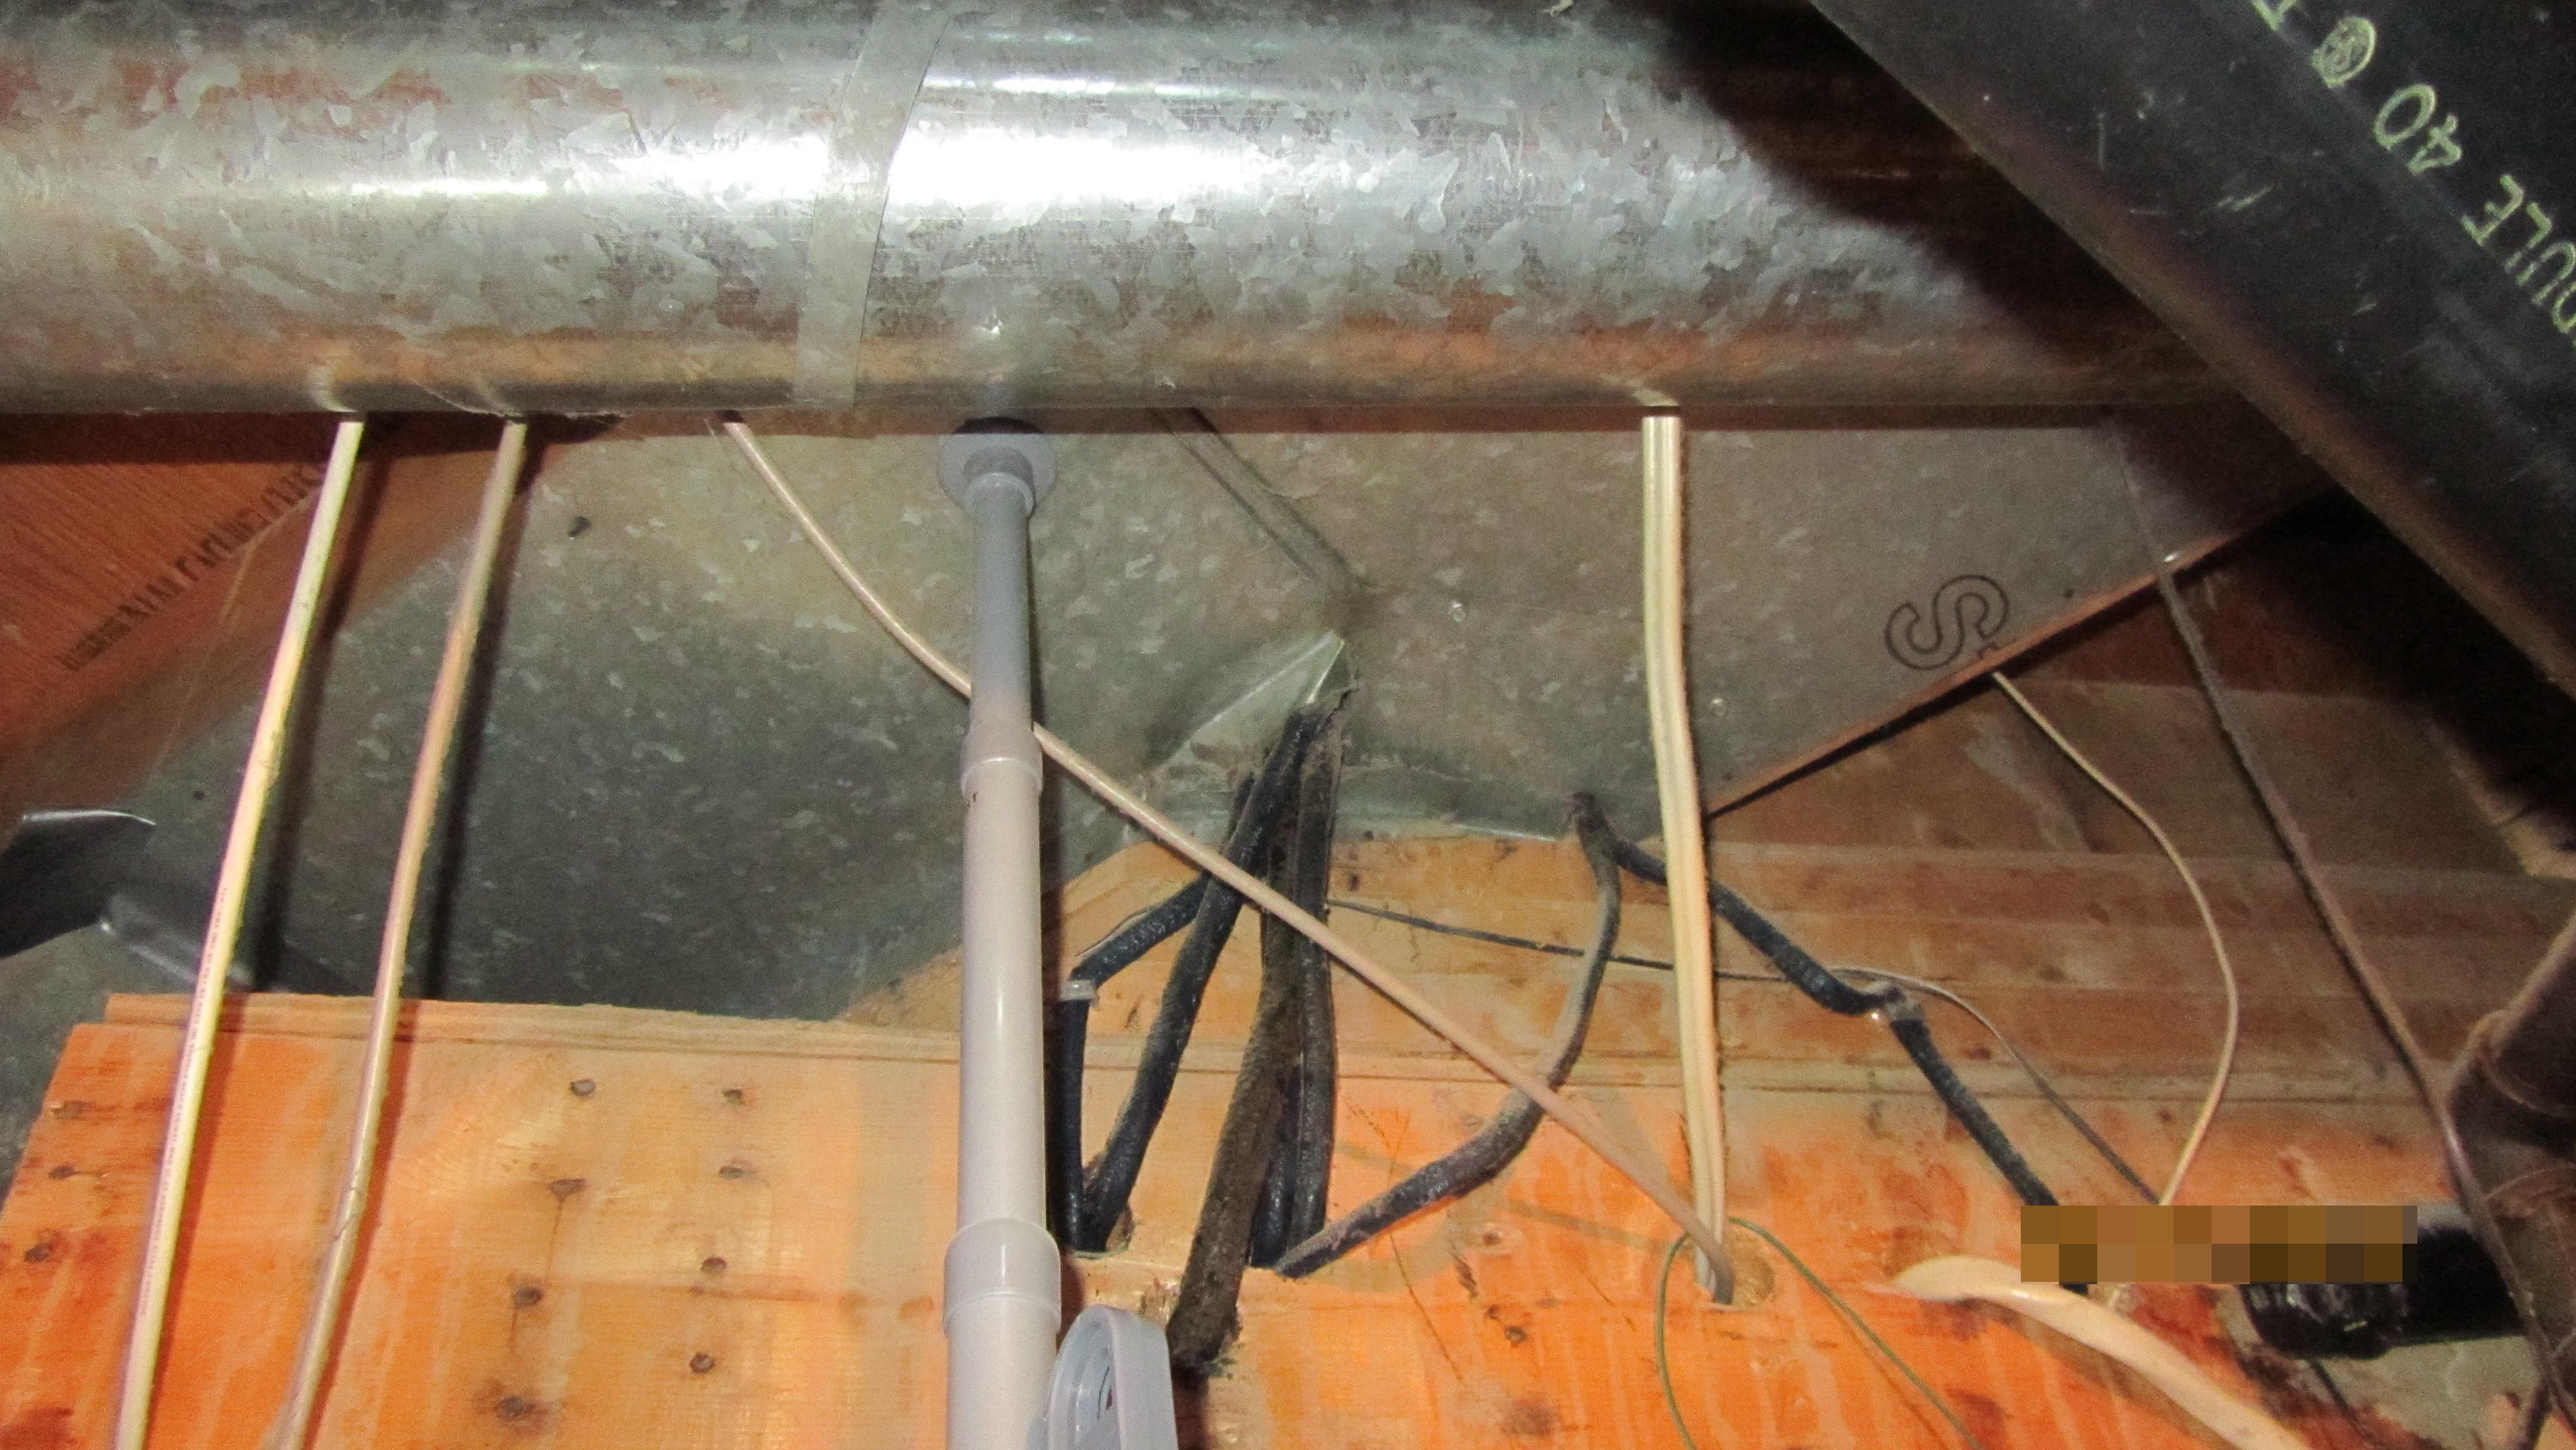 Live wires through heat ducting, shock andfire hazard